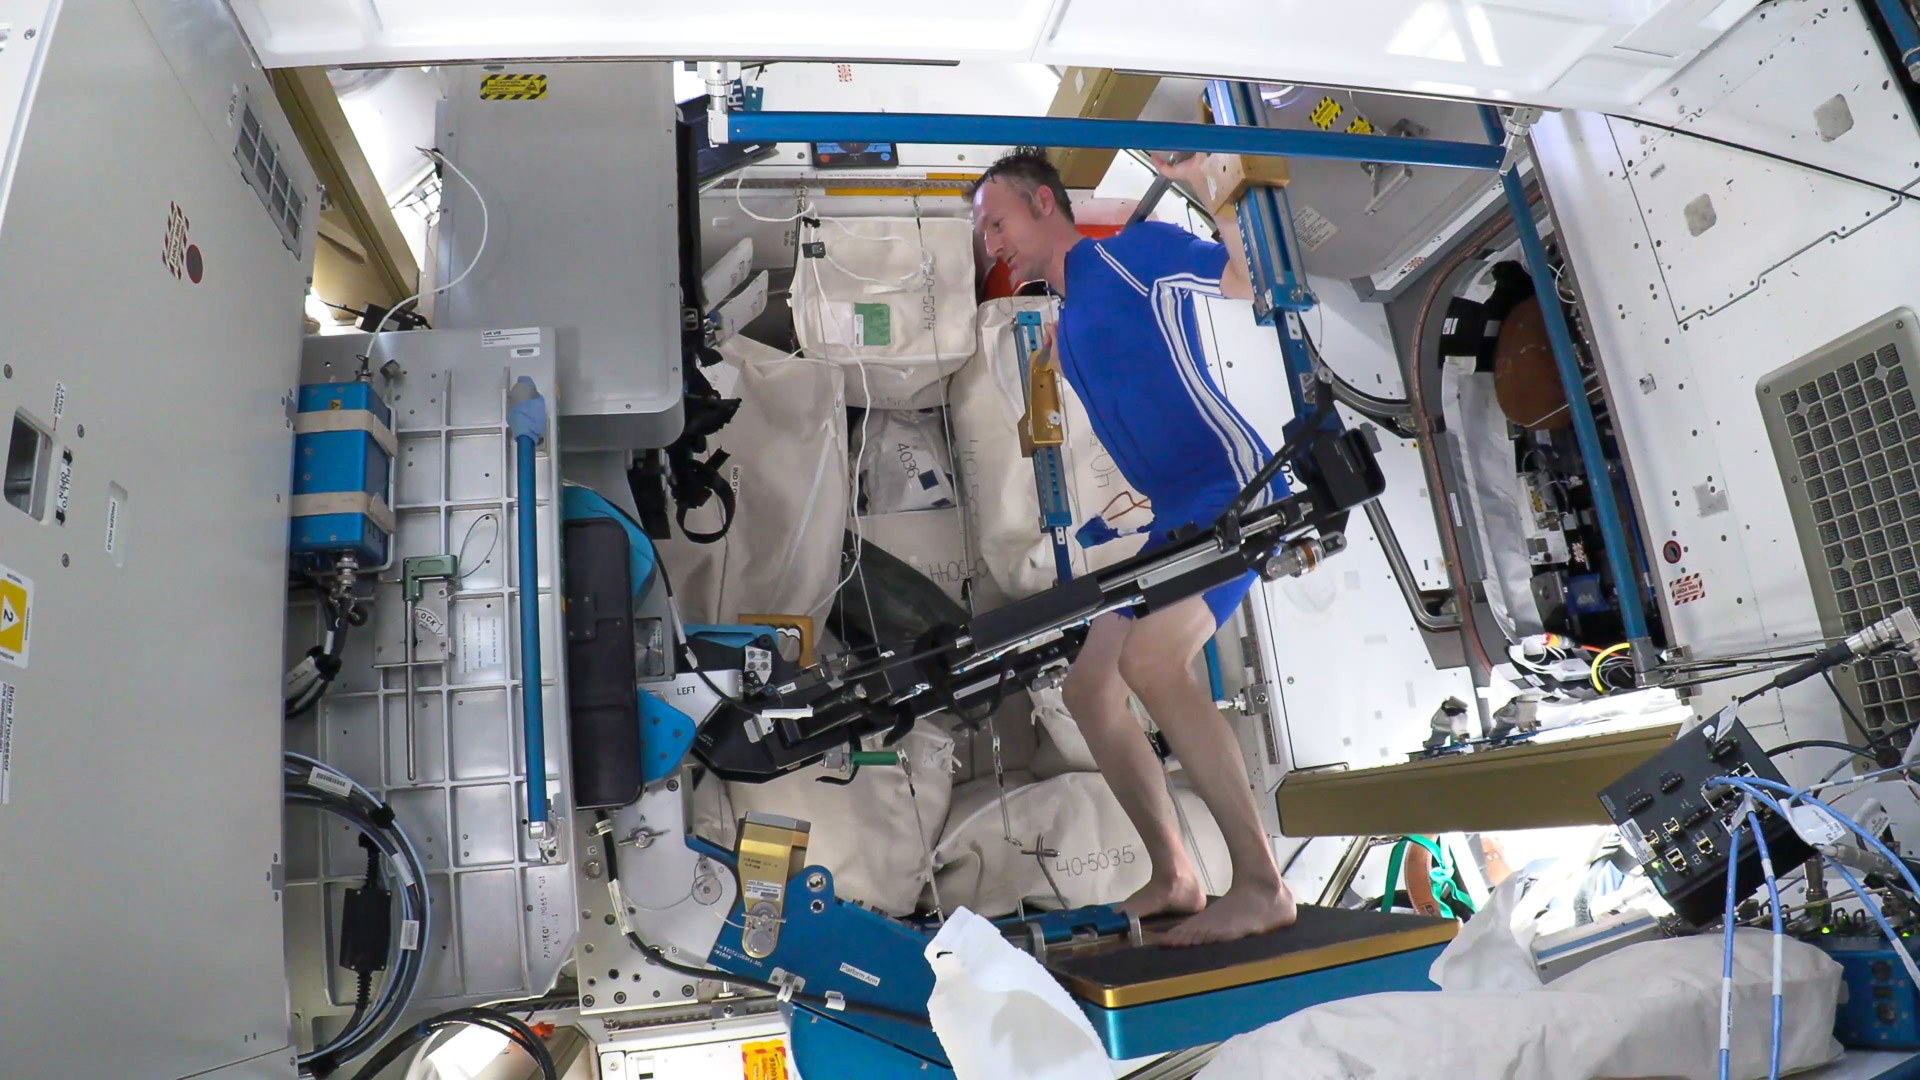 Versatile training in microgravity with the EMS suit